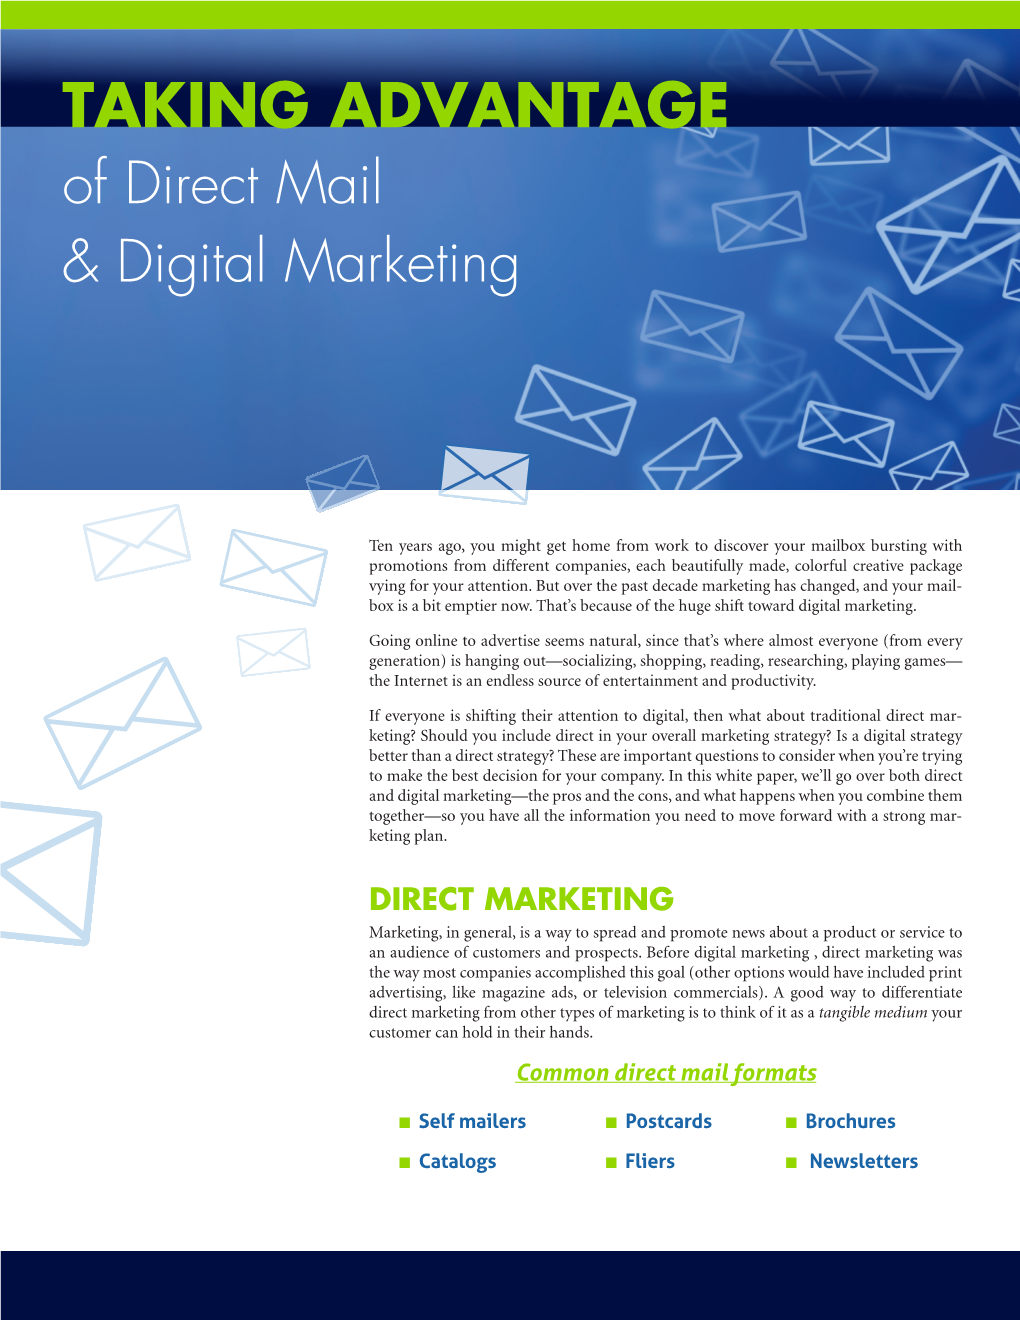 DIRECT MARKETING Marketing, in General, Is a Way to Spread and Promote News About a Product Or Service to an Audience of Customers and Prospects